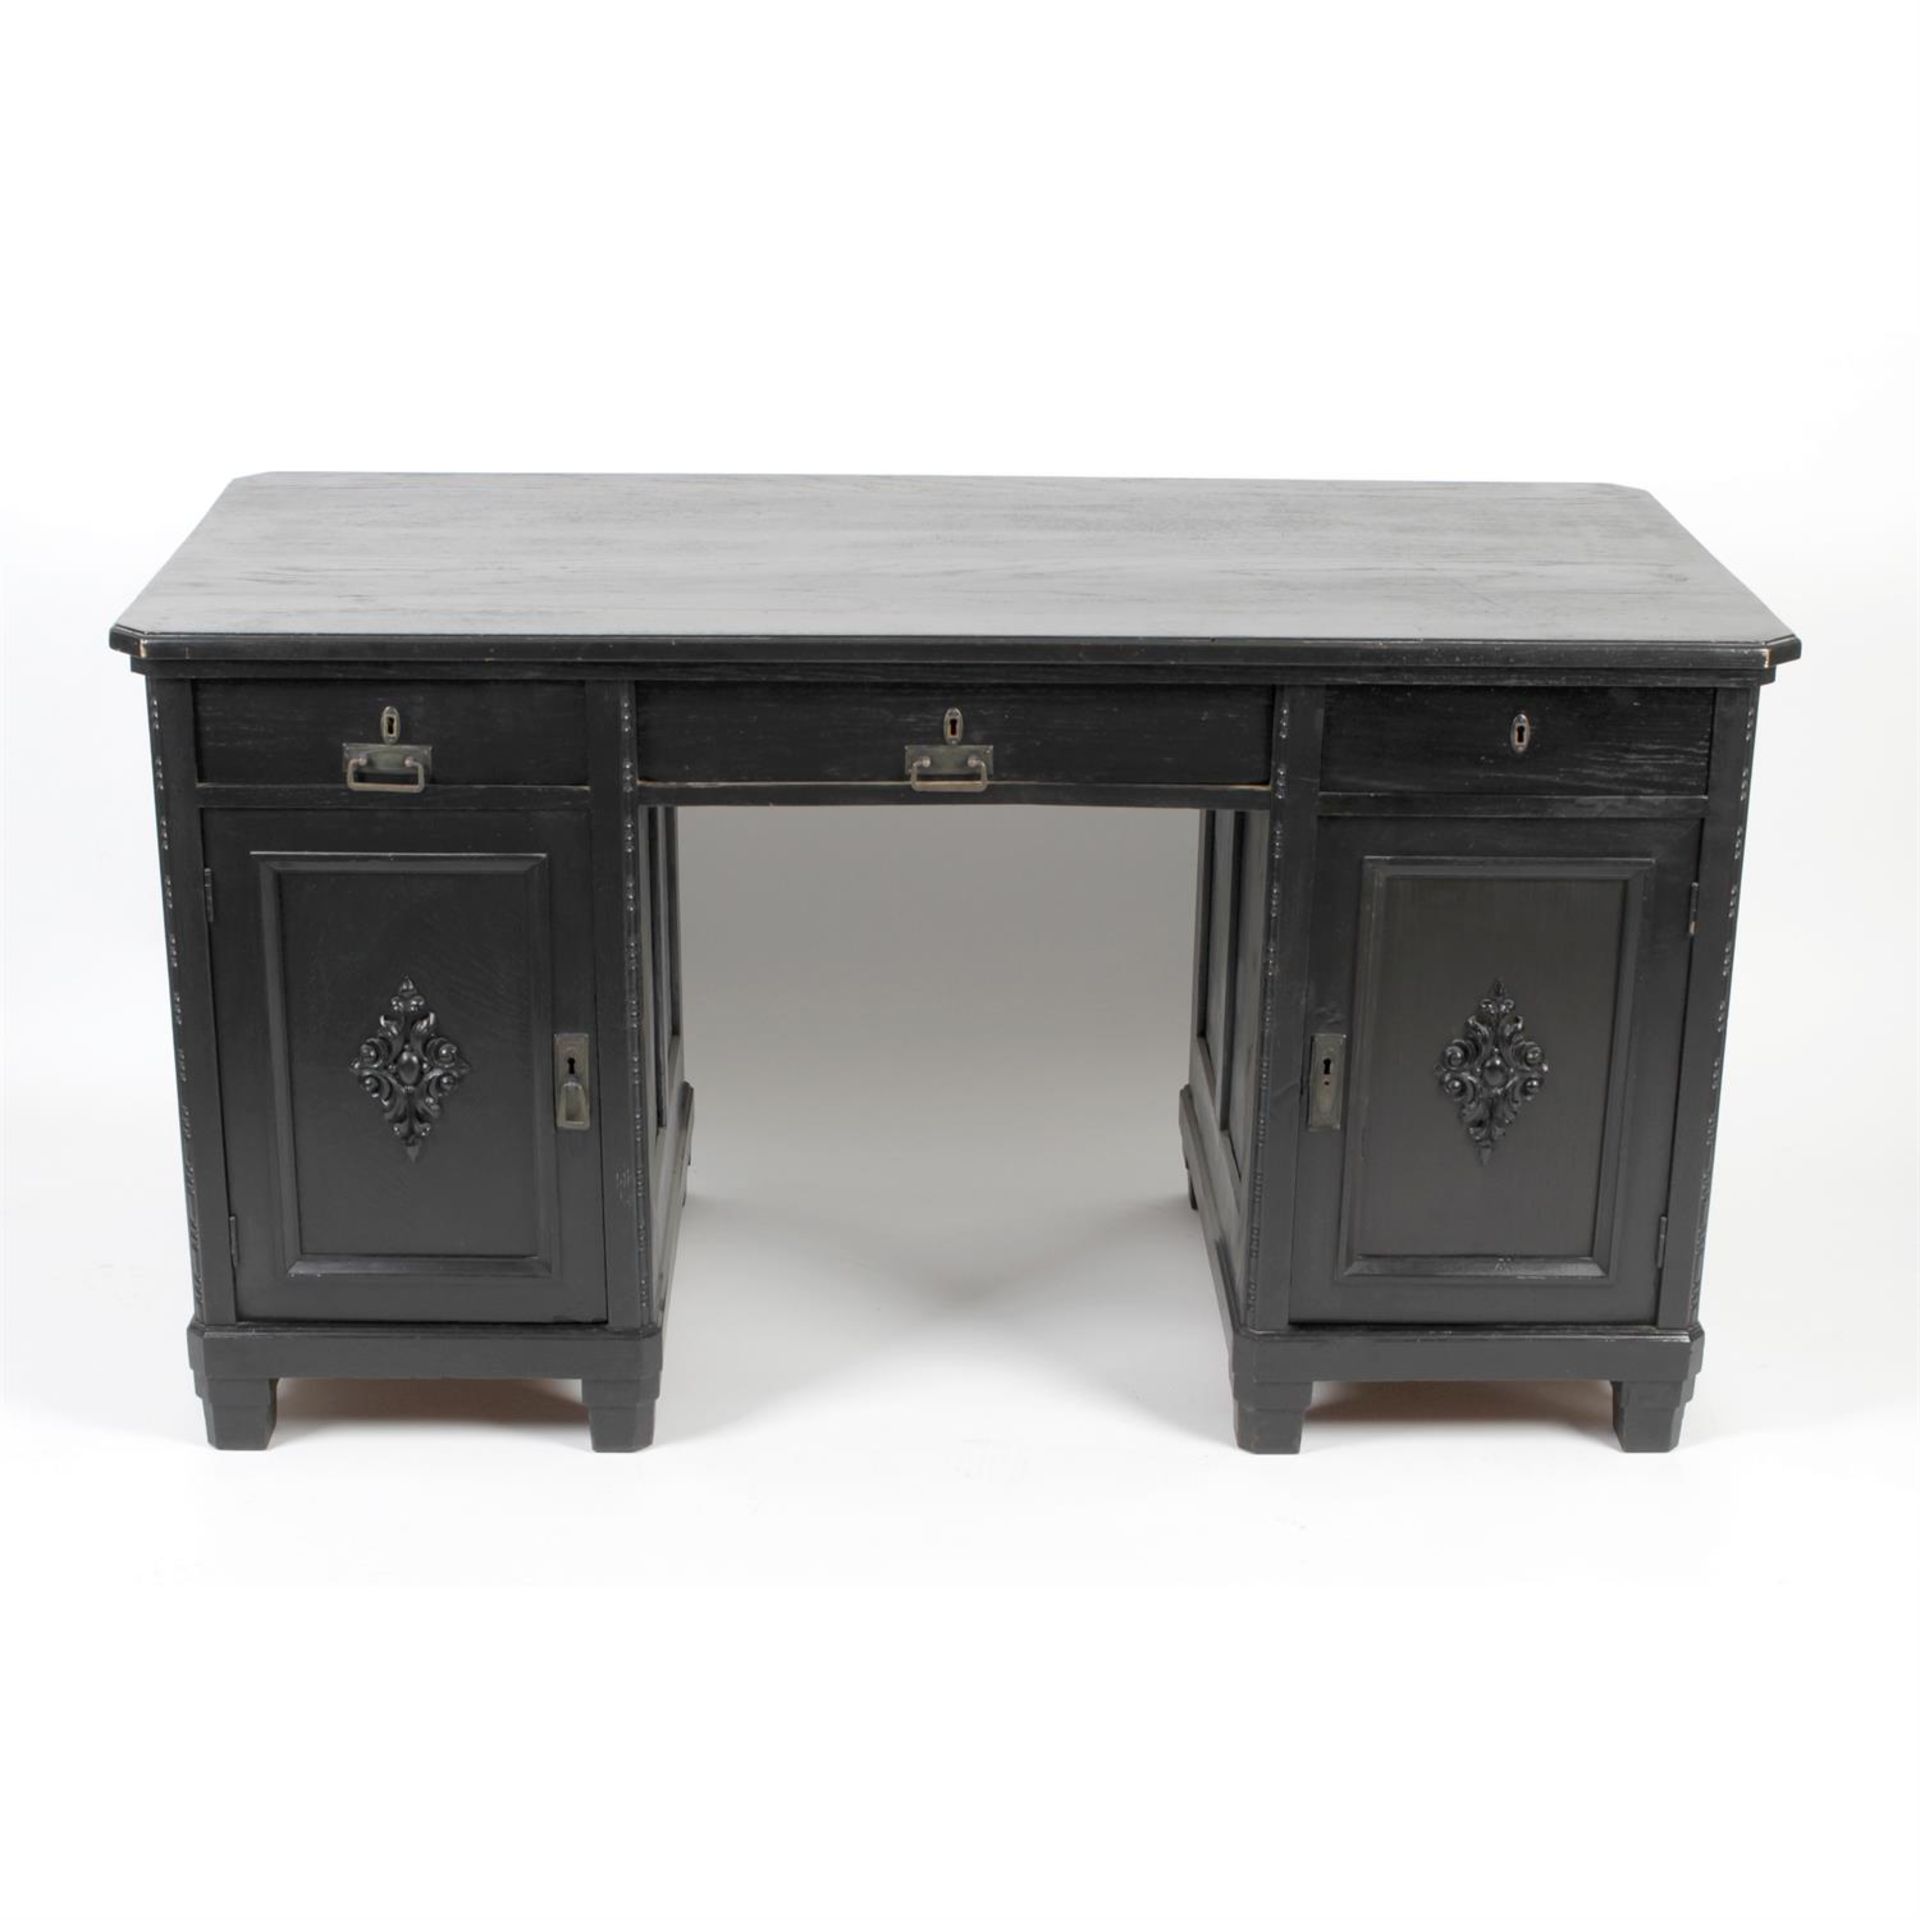 An early 20th century black painted oak bookcase, together with matching desk. - Image 2 of 2